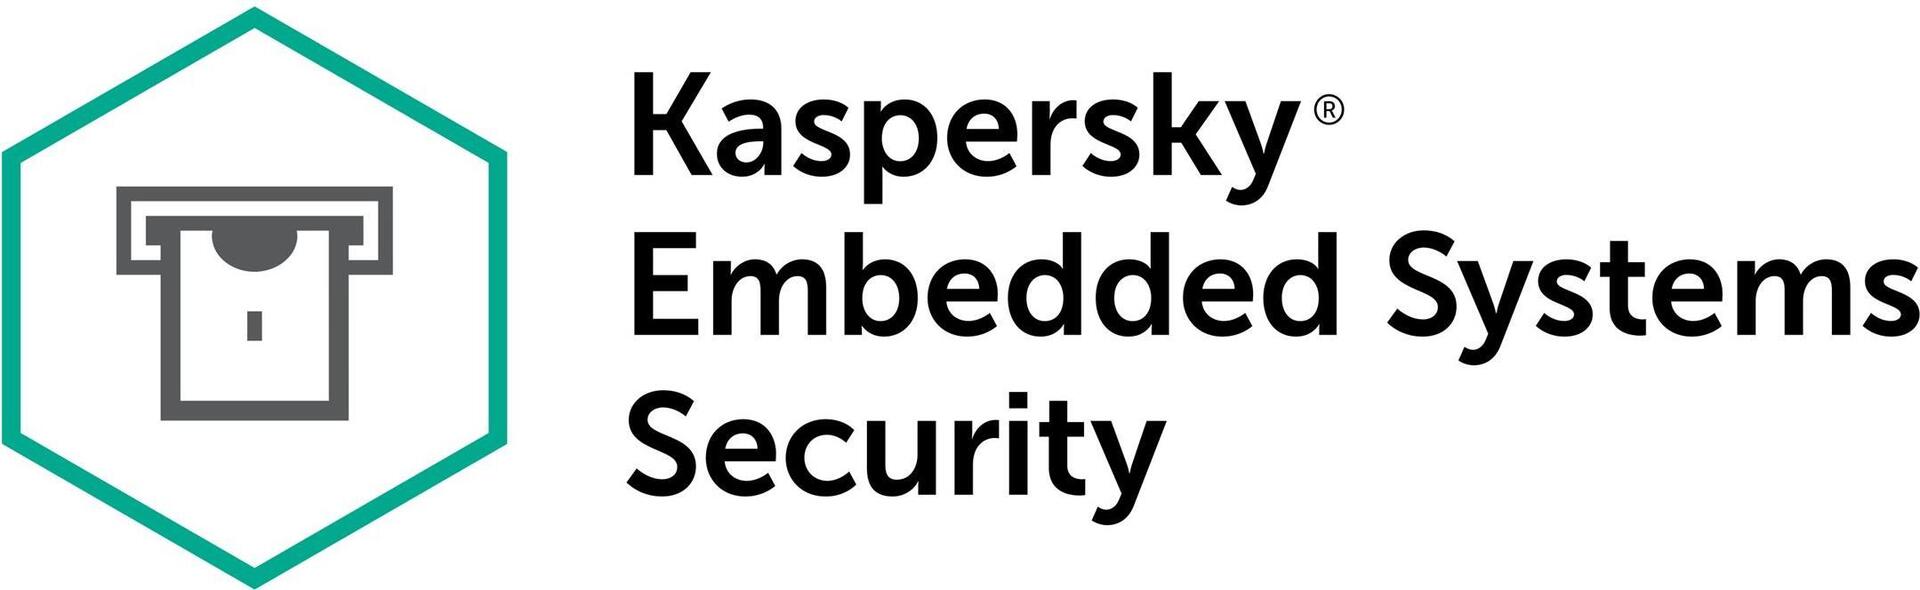 Kaspersky Embedded Systems Security (KL4891XARTS)